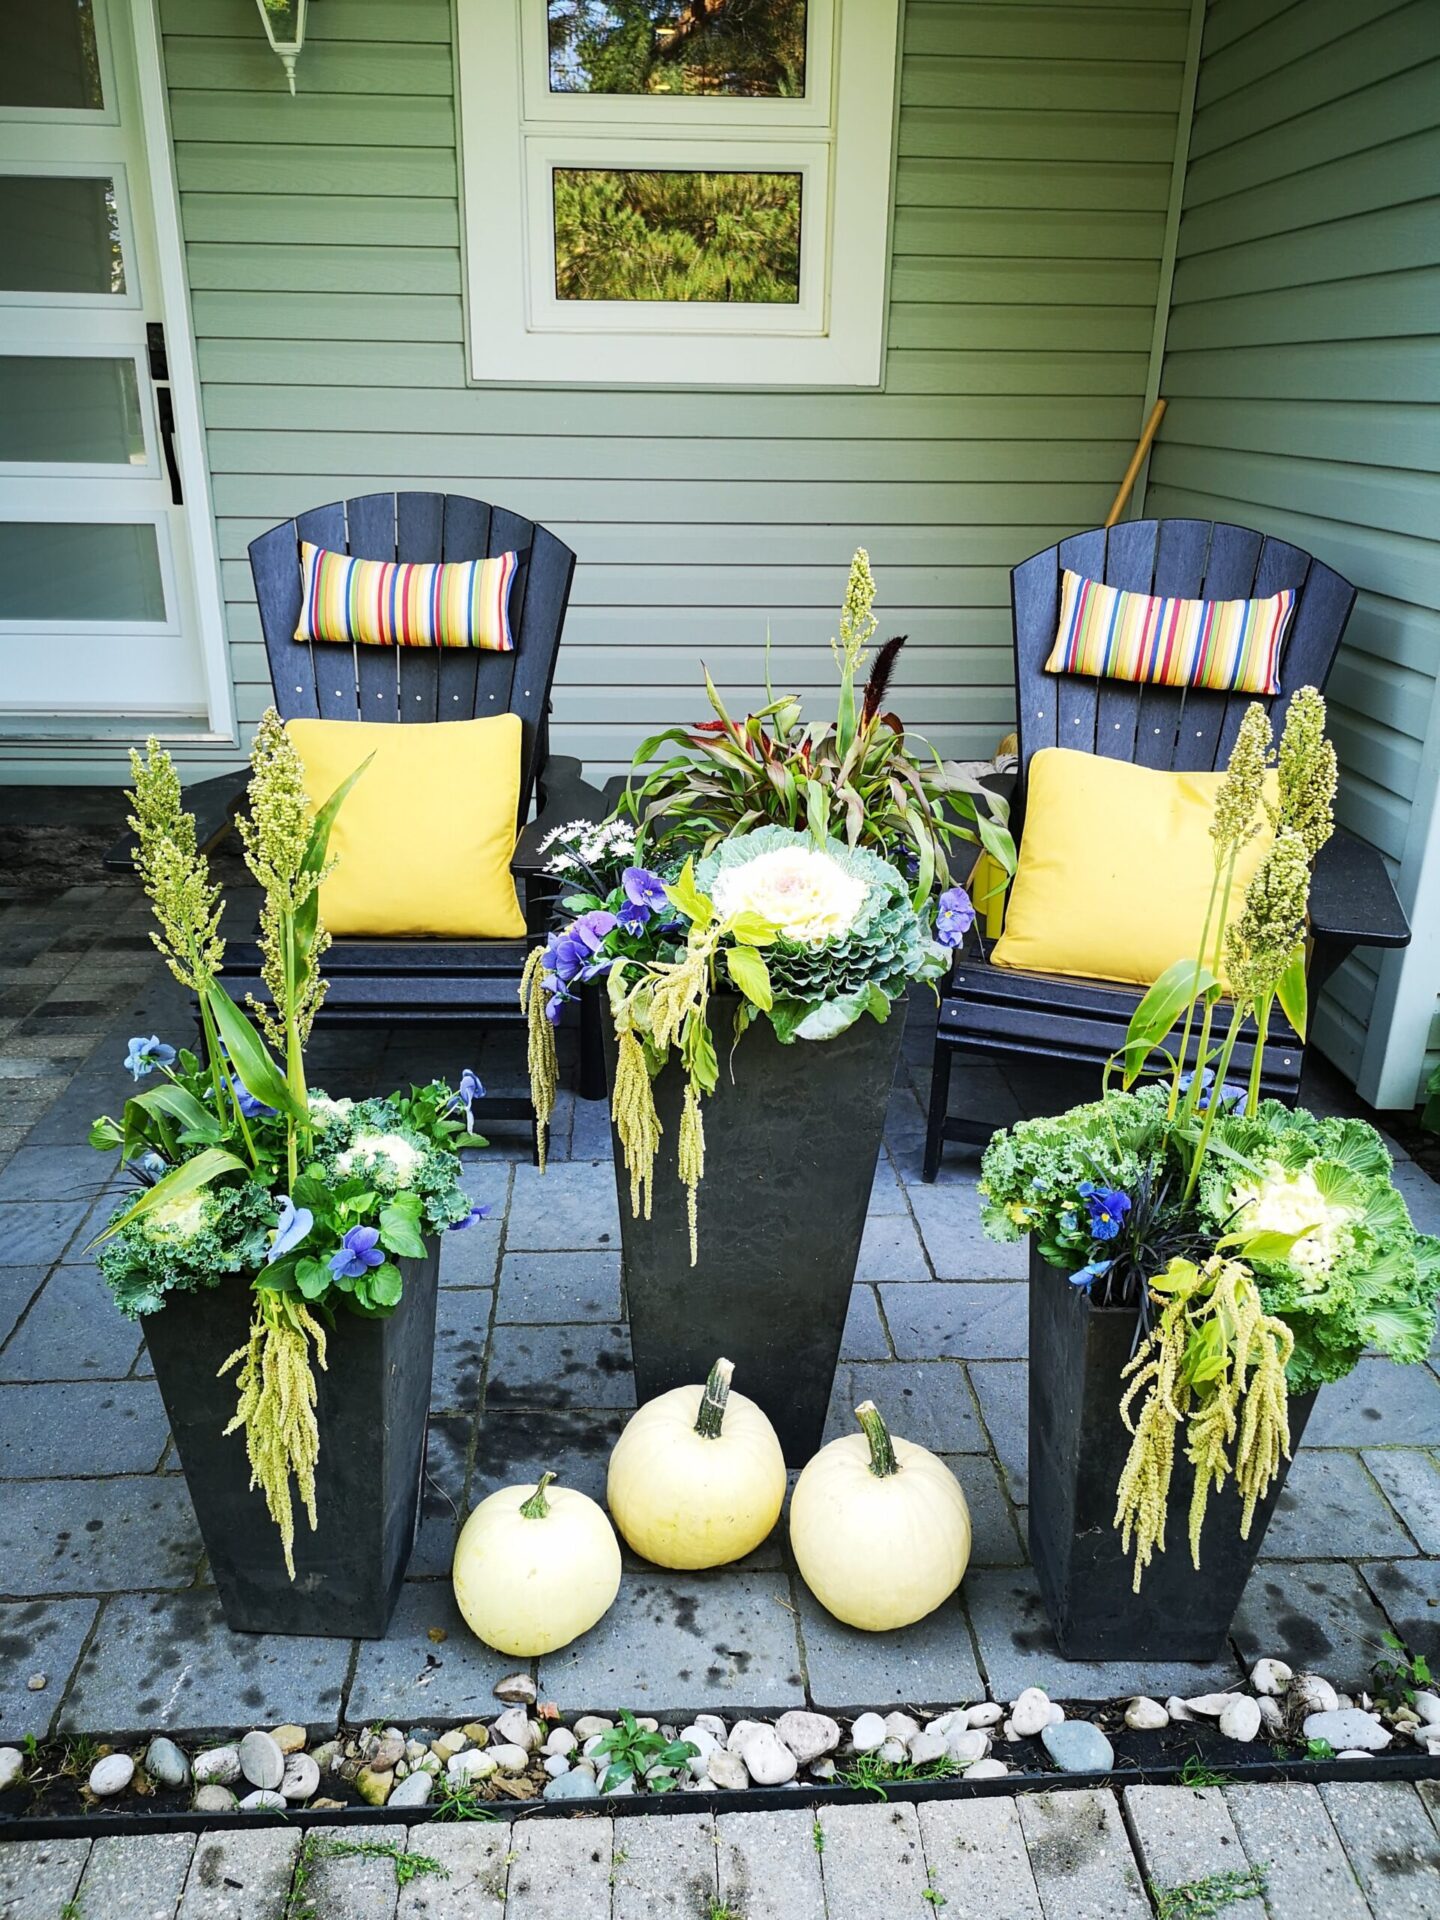 Two Adirondack chairs with colorful cushions sit on a patio, flanked by ornate planters and white pumpkins, with a green house background.